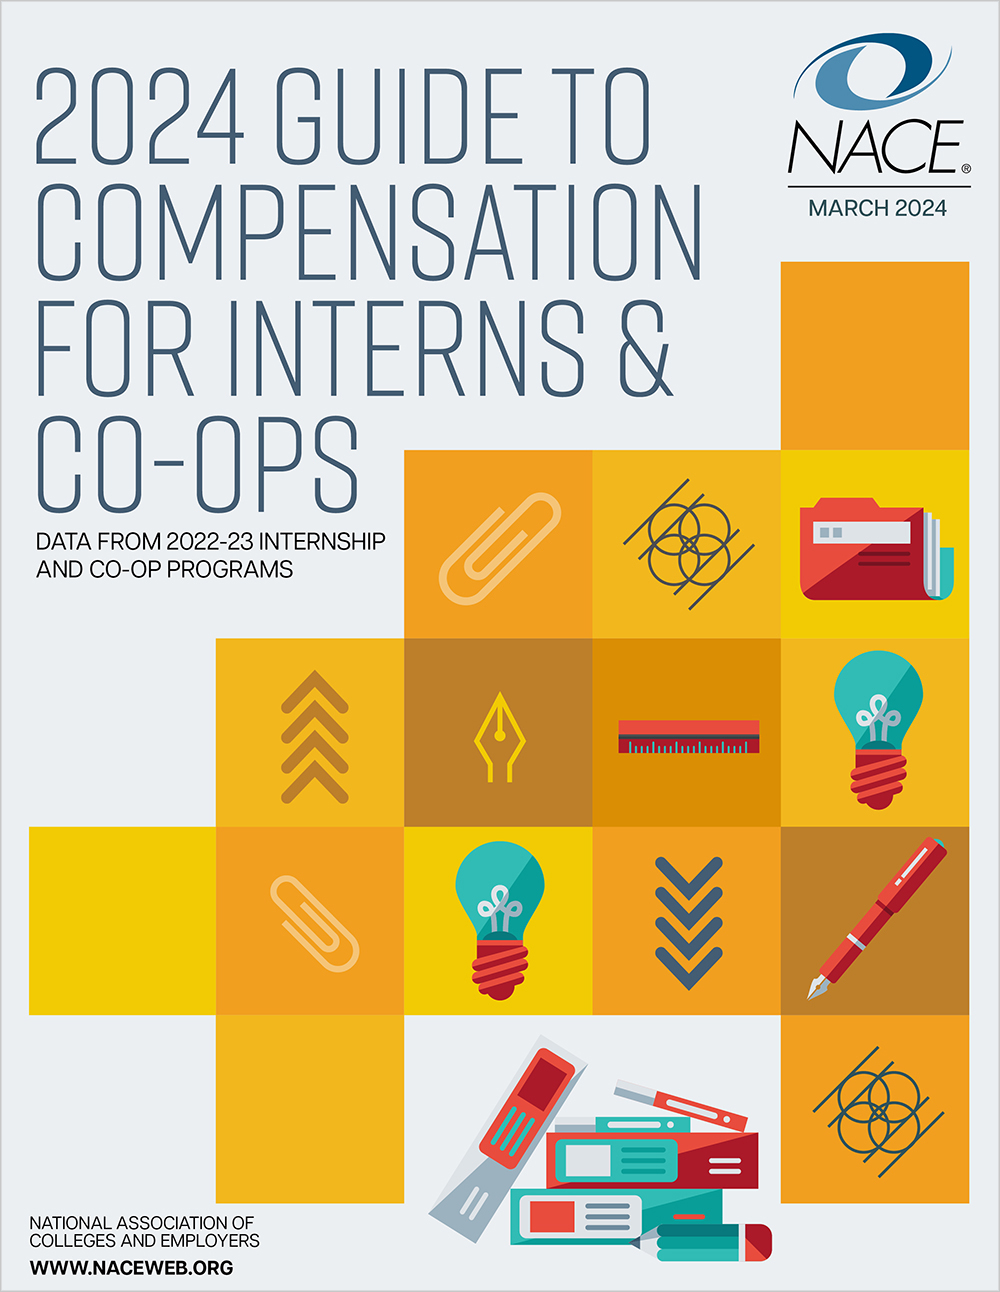 2024 GUIDE TO COMPENSATION FOR INTERNS & CO-OPS